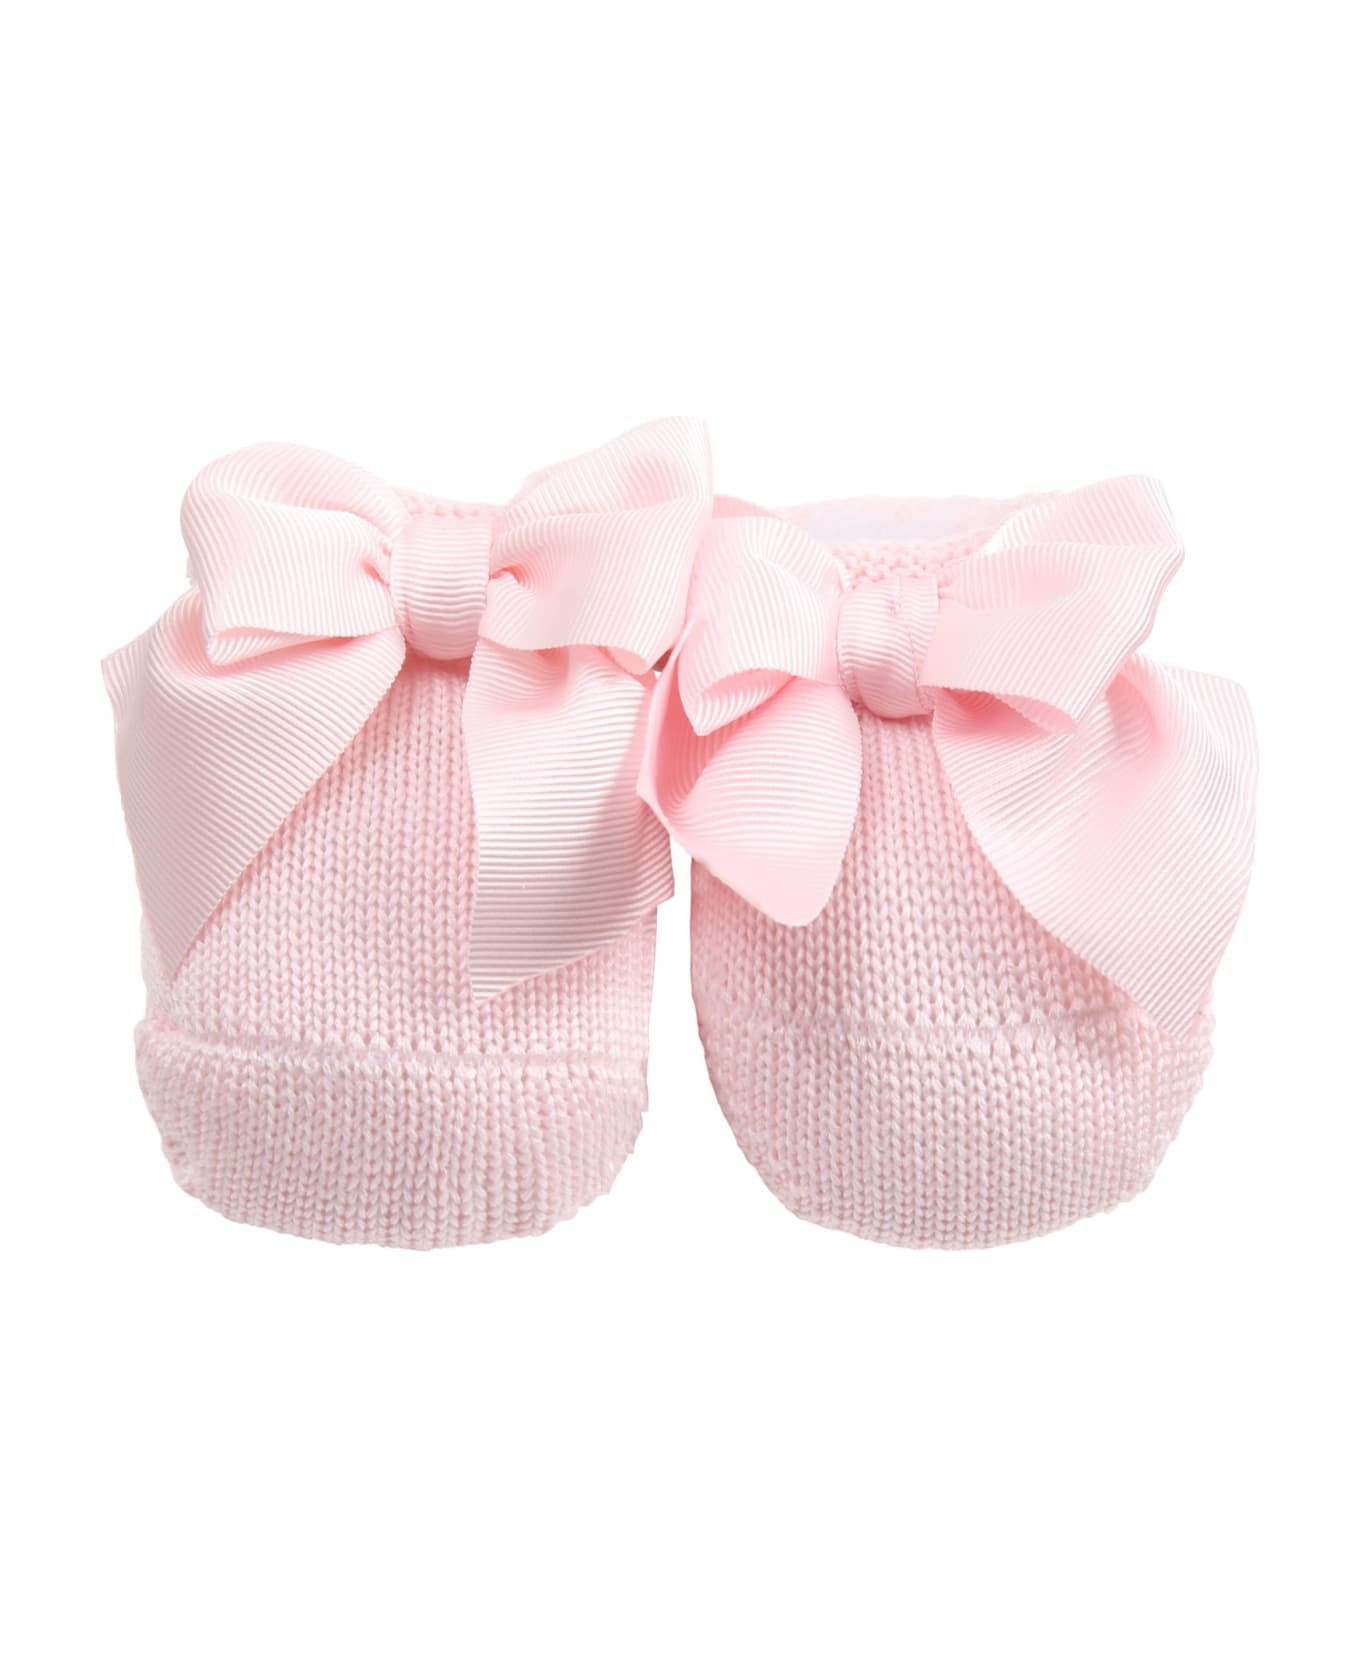 Story Loris Pink Baby Bootee For Babygirl - Pink